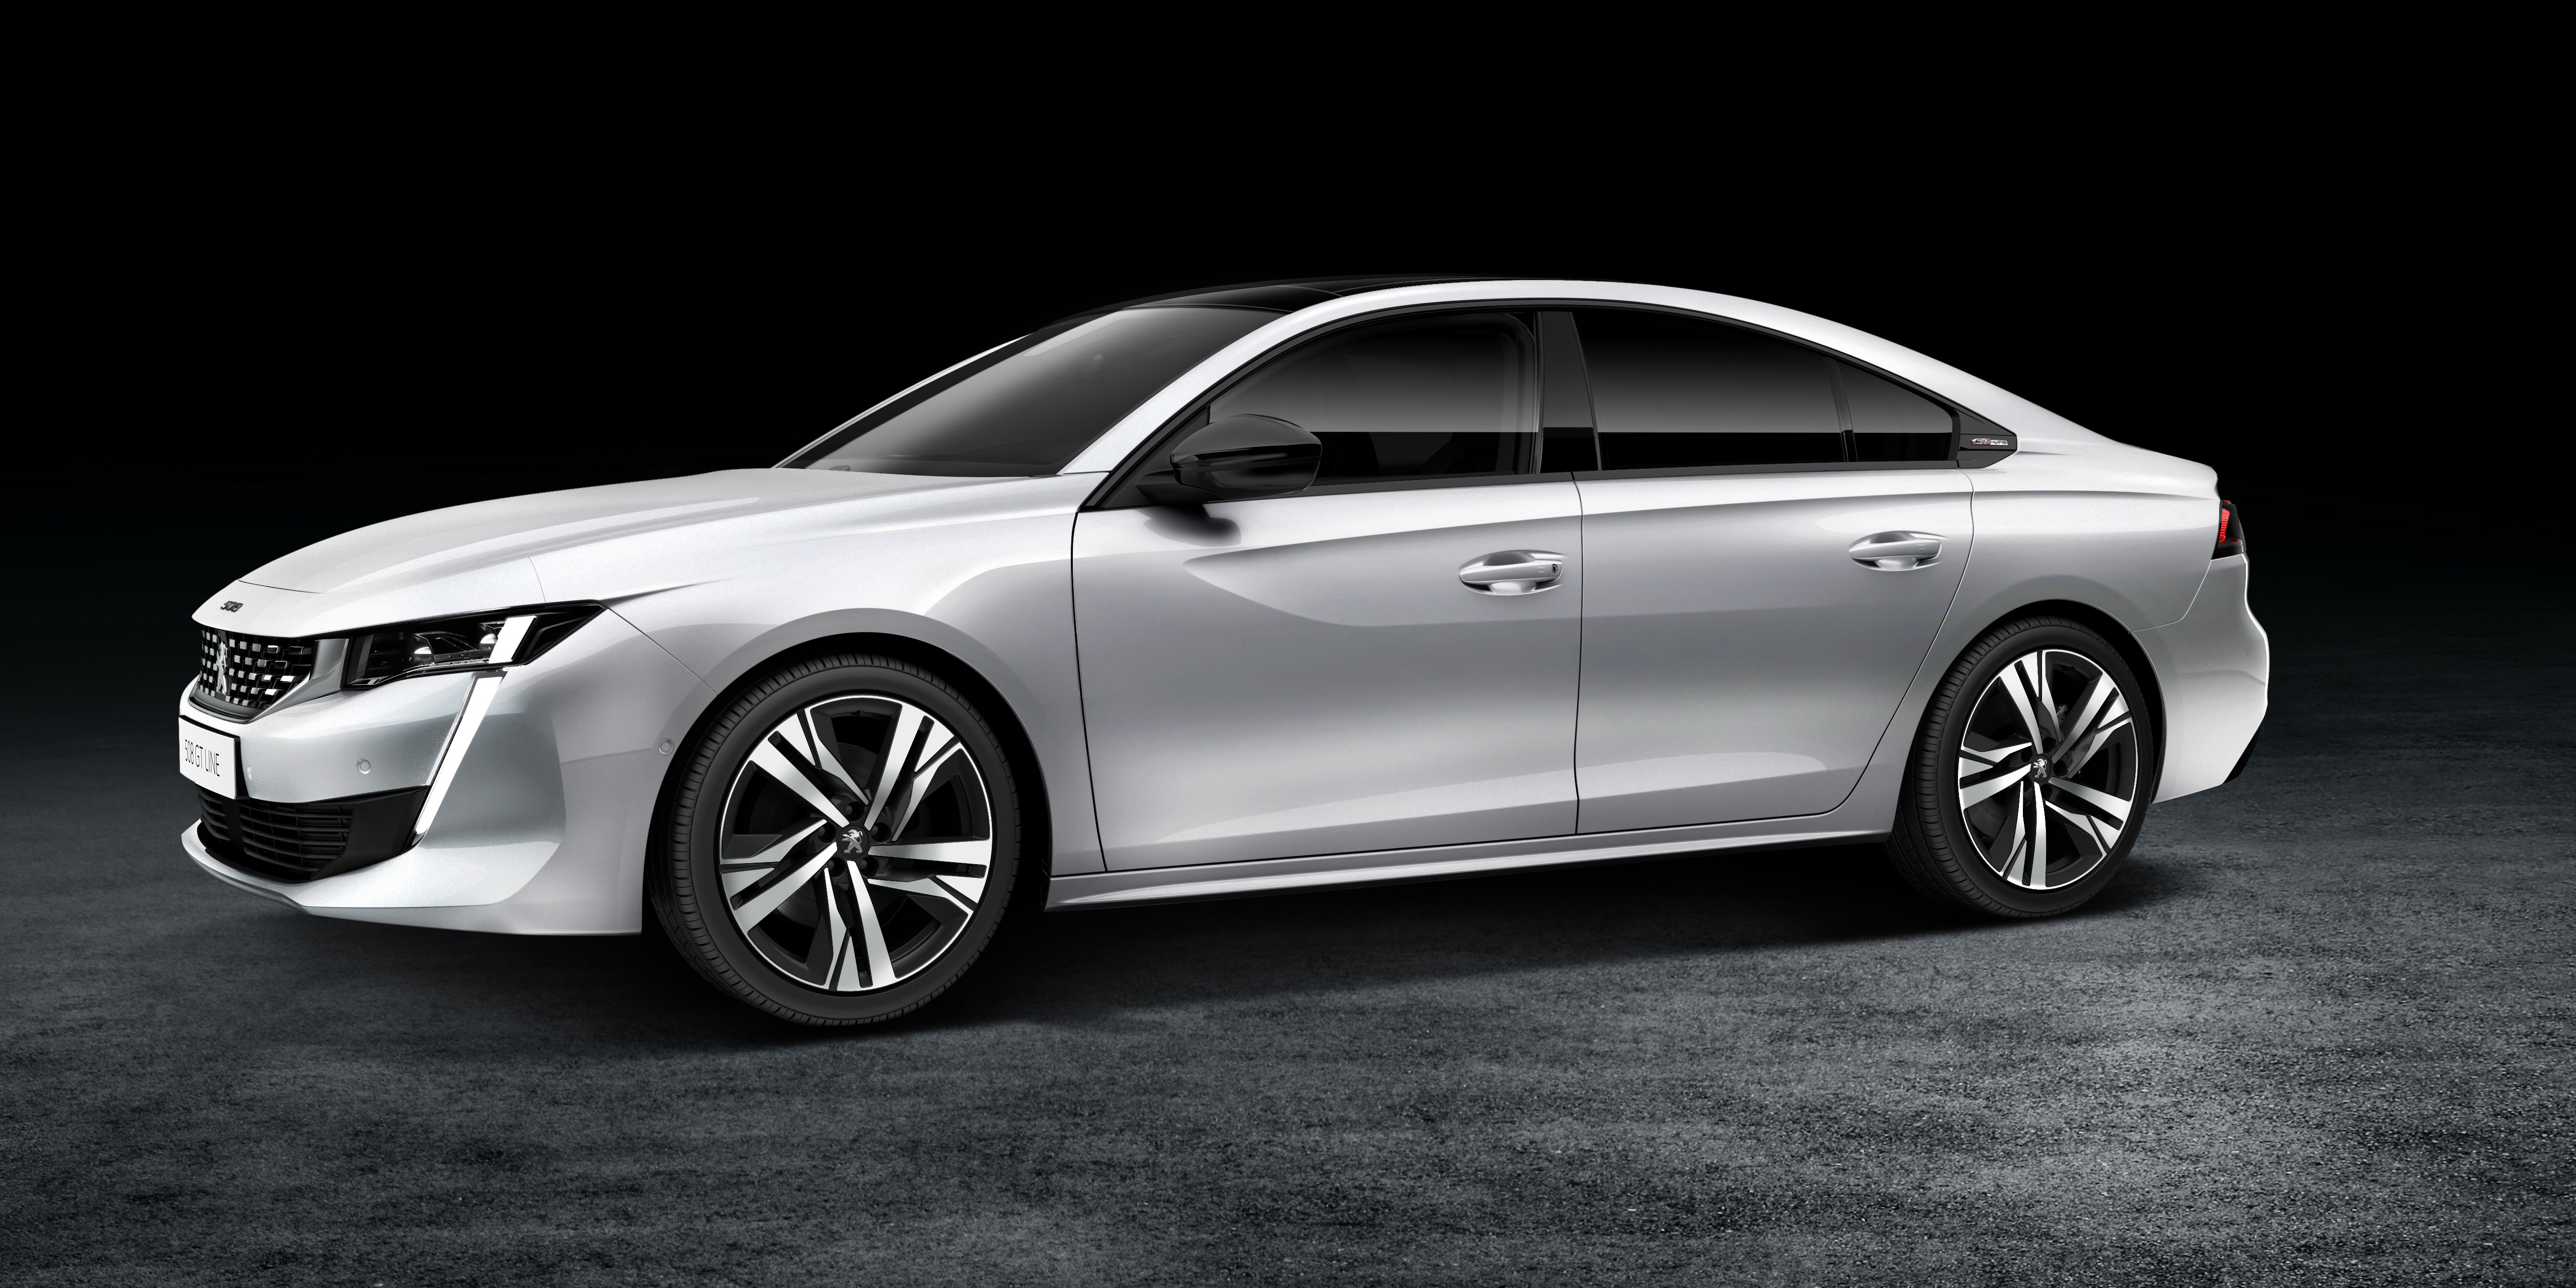 Peugeot 508 SW hd specifications